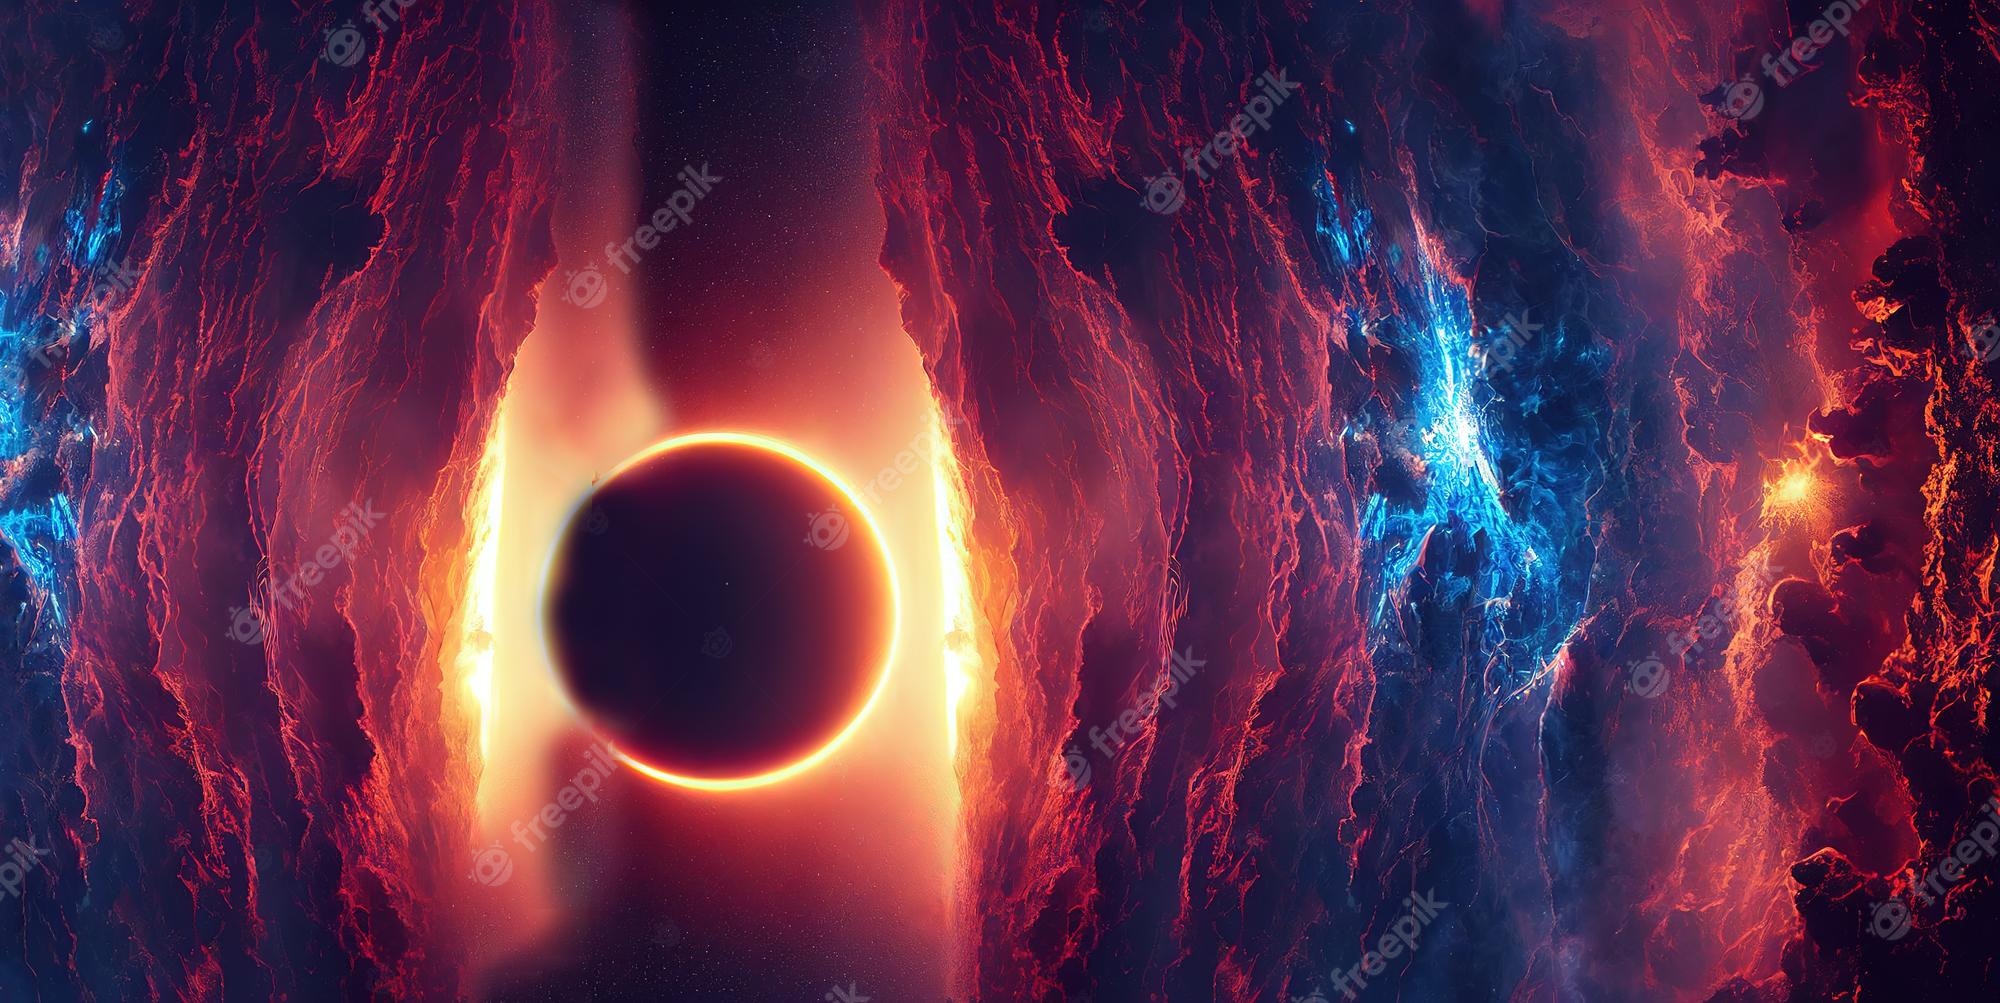 Premium Photo. A total eclipse of the sun can be seenls of the black hole 3D rendering